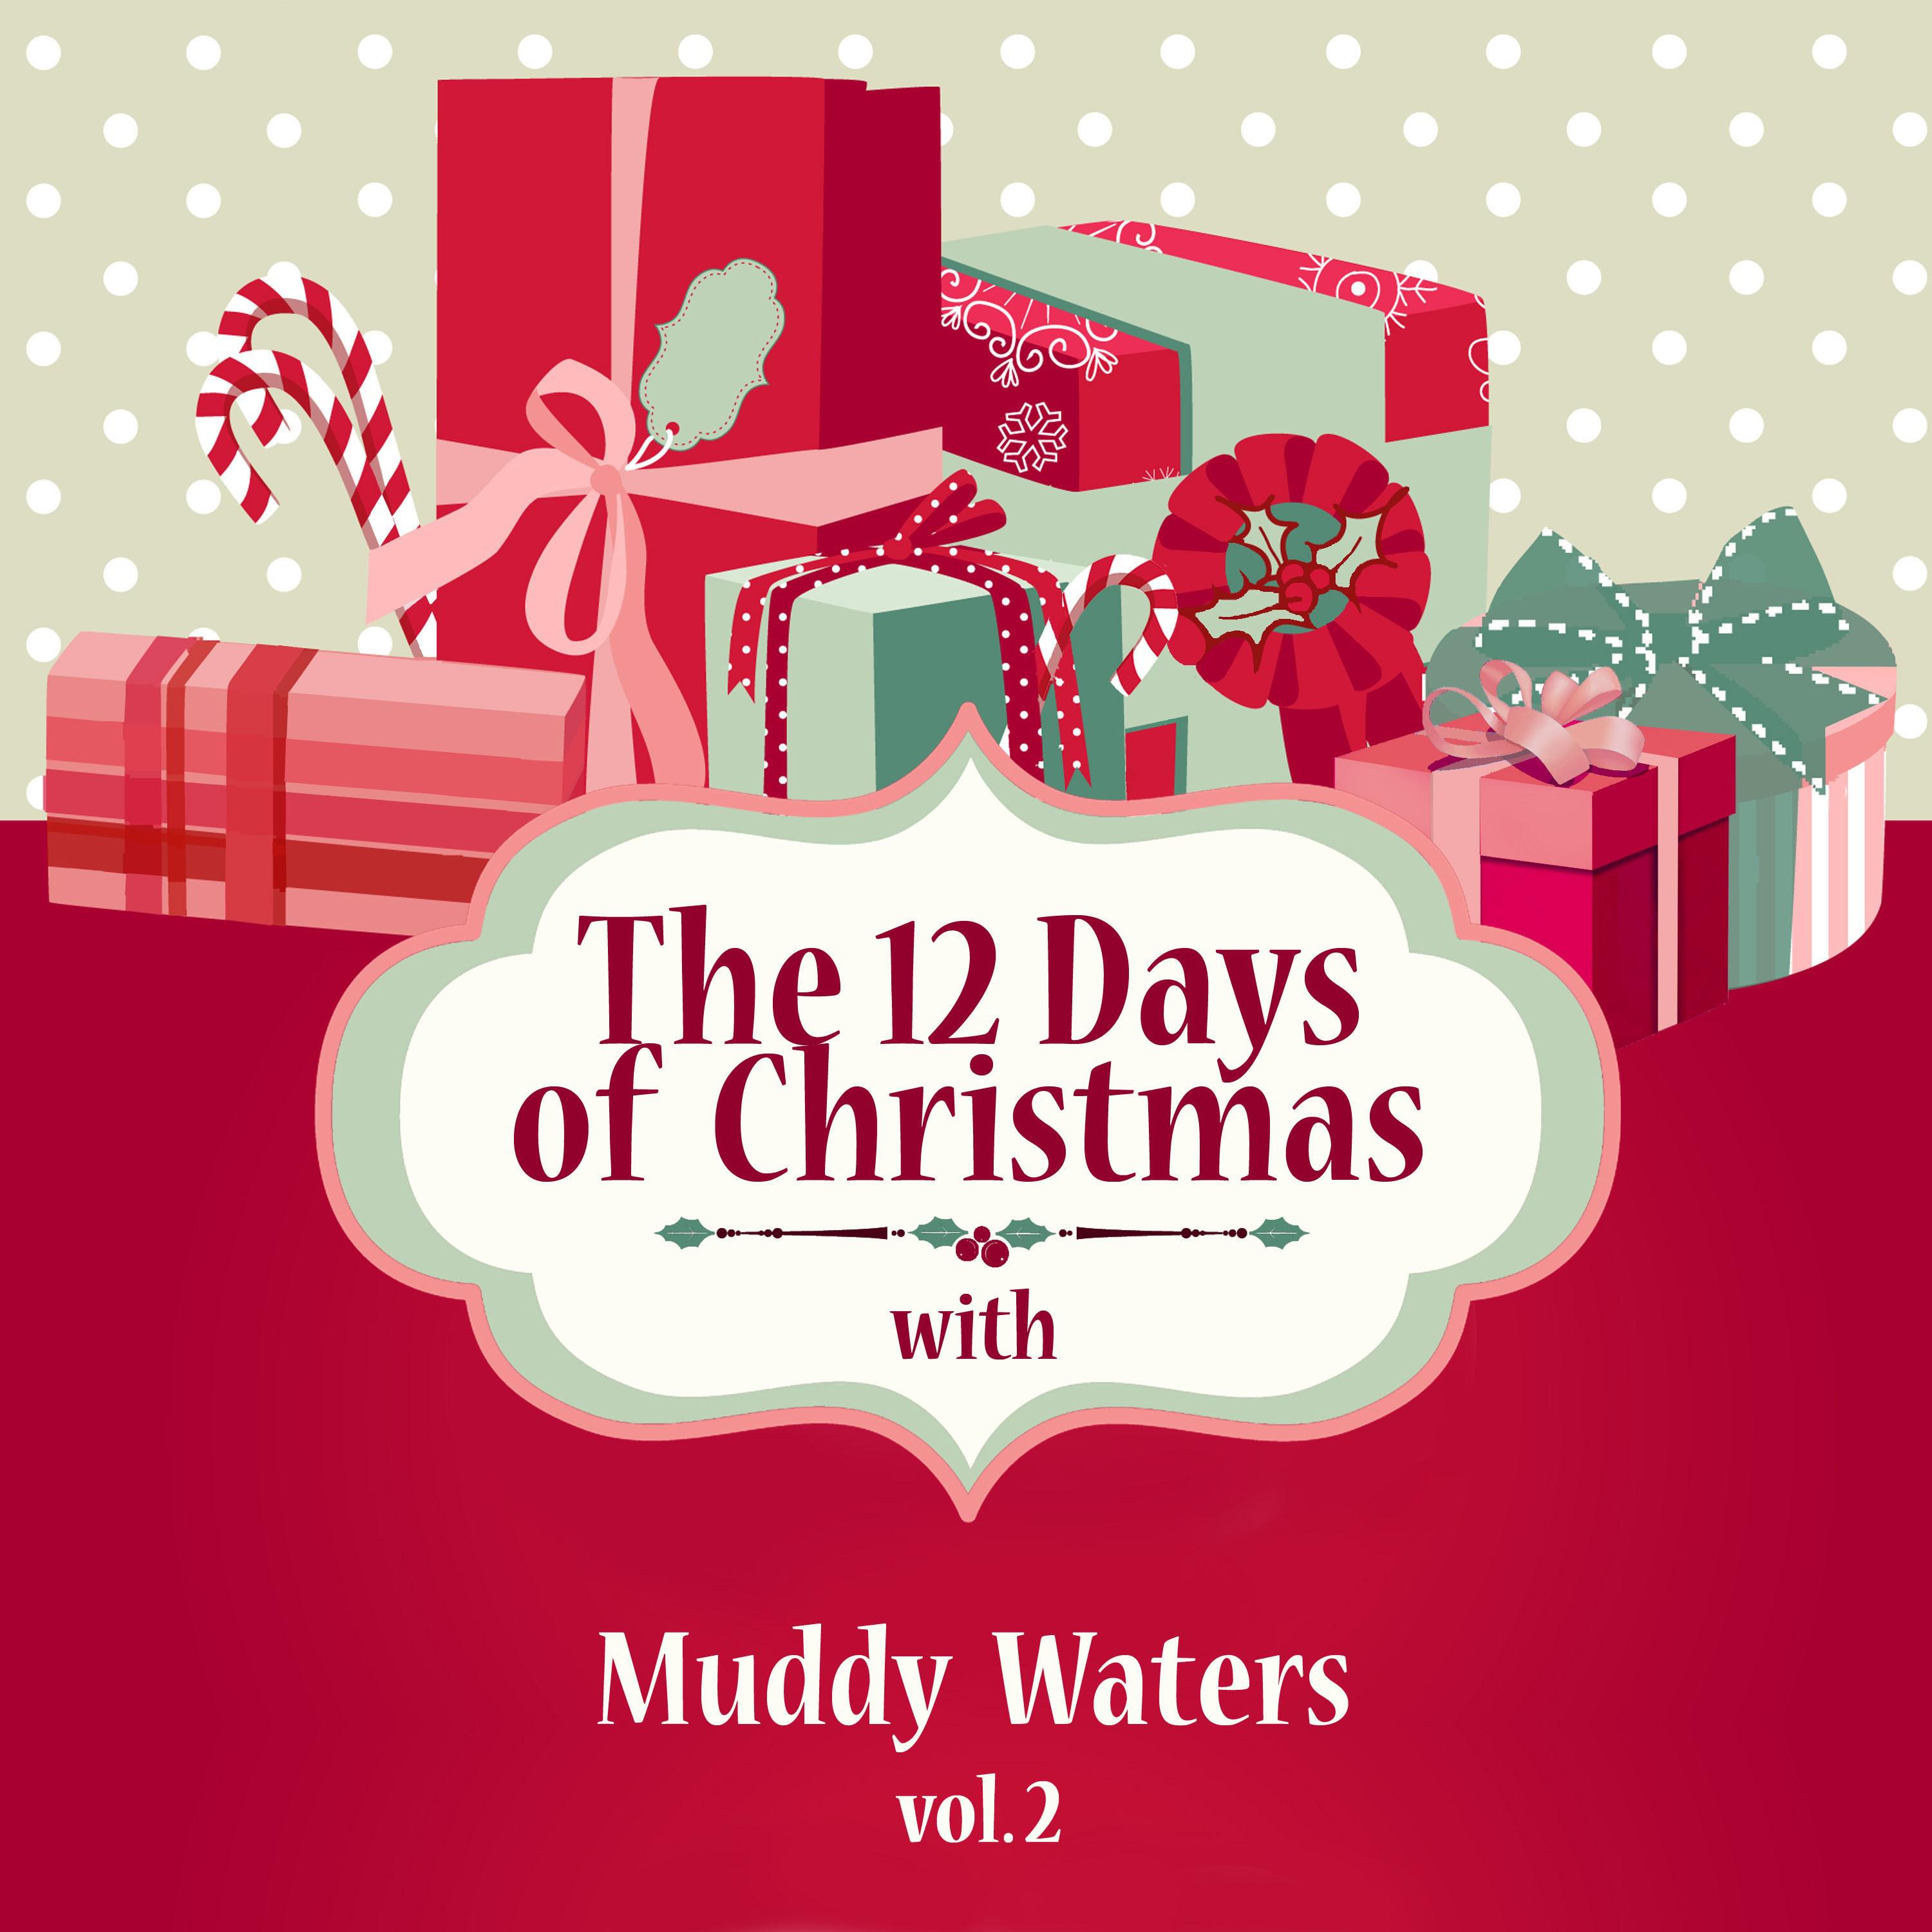 The 12 Days of Christmas with Muddy Waters, Vol. 2